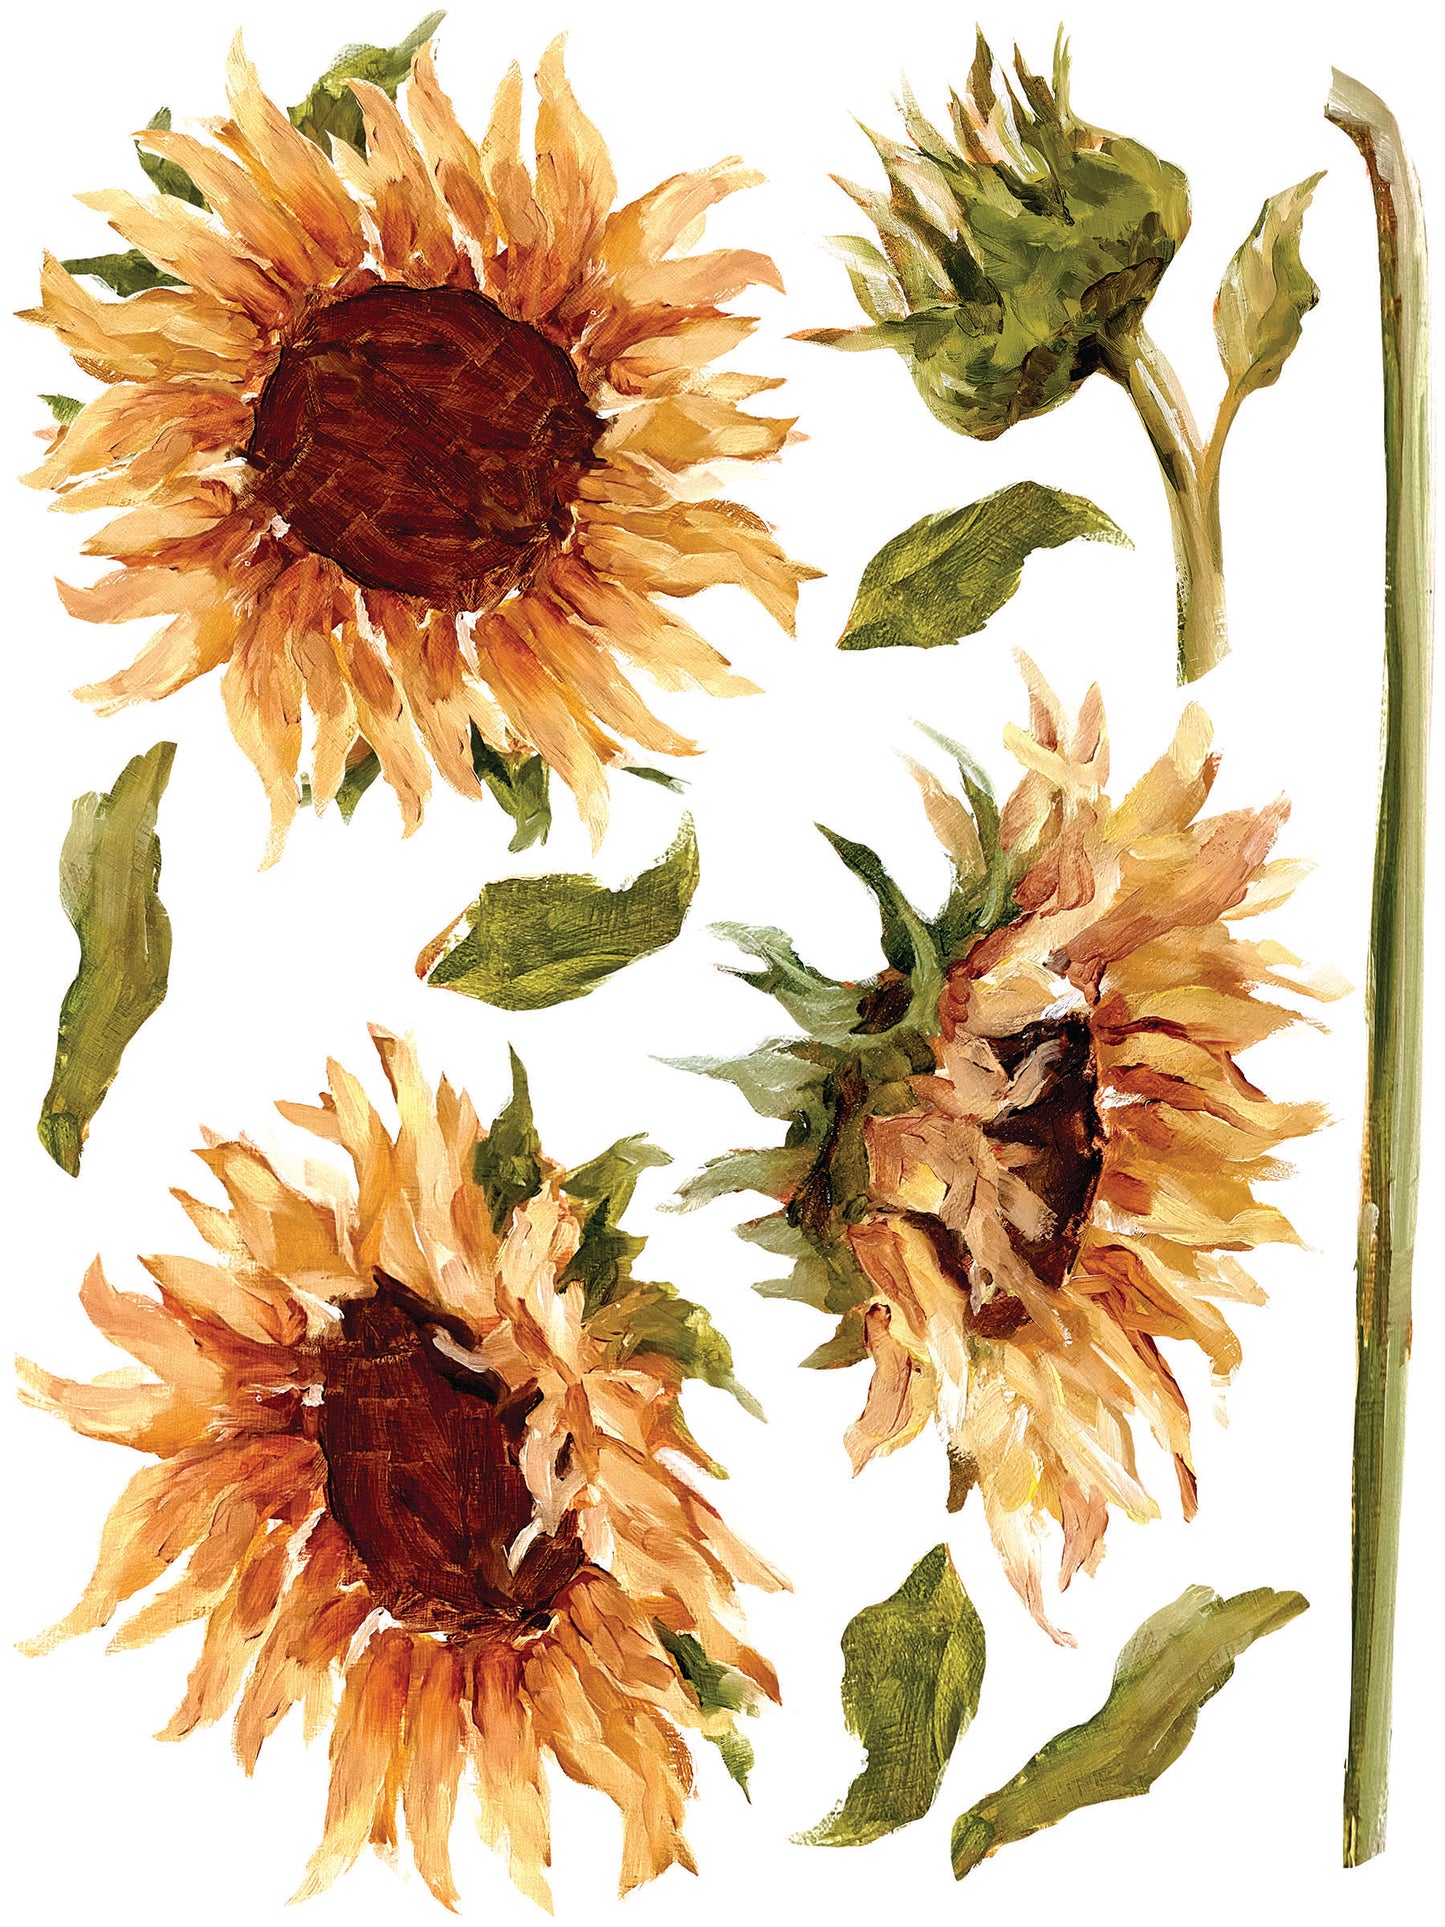 Iron Orchid Designs Painterly Florals | IOD Transfer